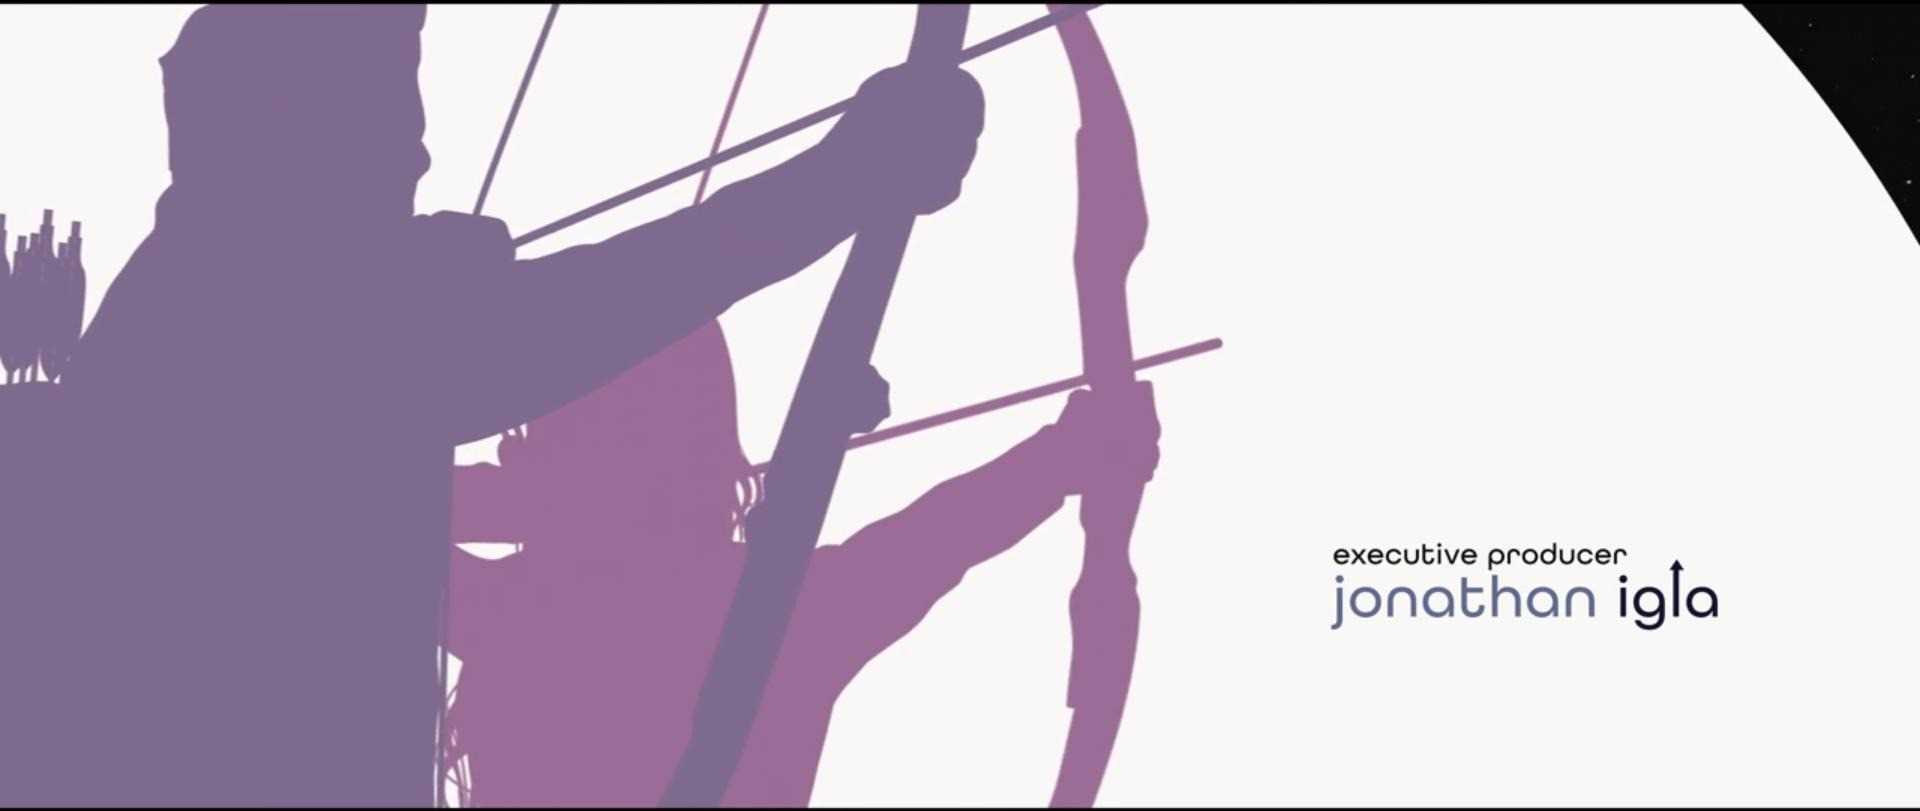 The silhouettes of Clint and Kate, drawing their bows toward the right. Clint is in dark purple, Kate is in pink-ish purple.